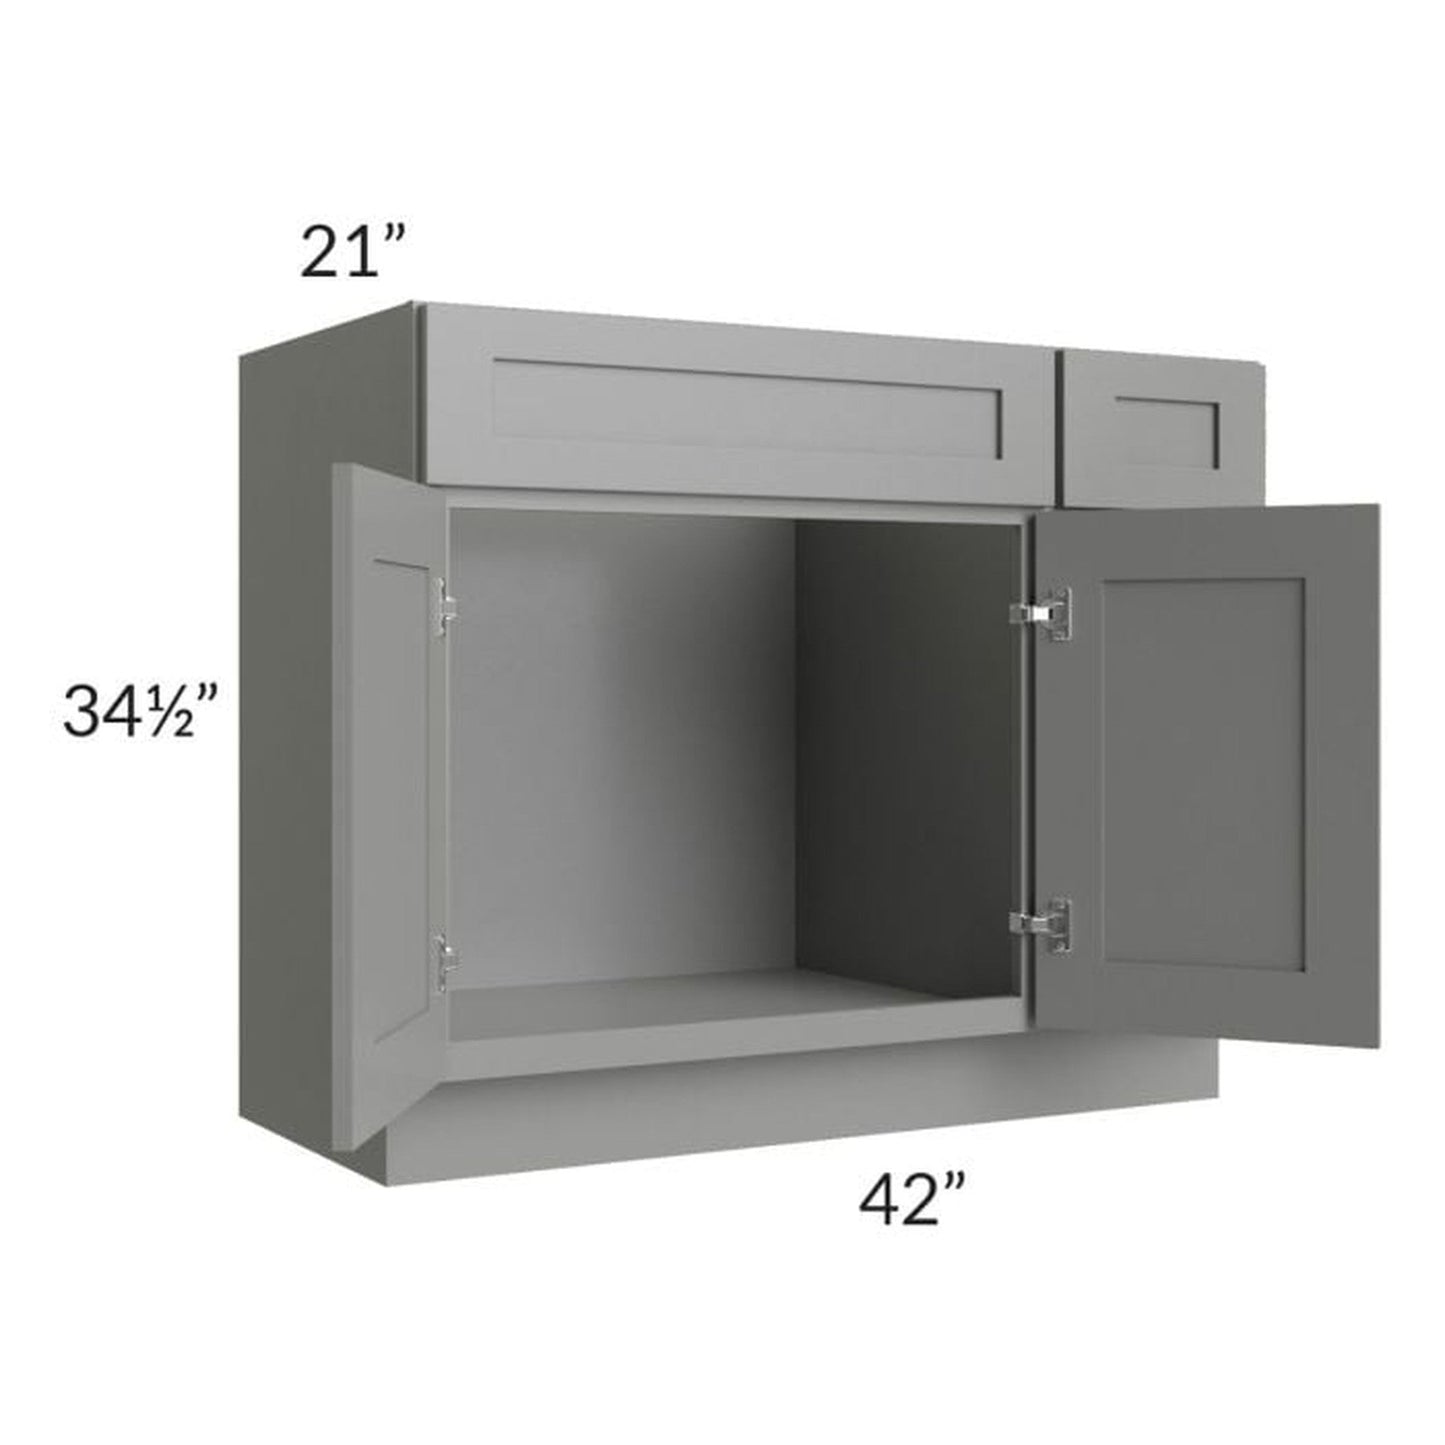 RTA Shale Grey Shaker 42" Vanity Sink Base Cabinet (Drawers on Right) with 1 Decorative End Panel